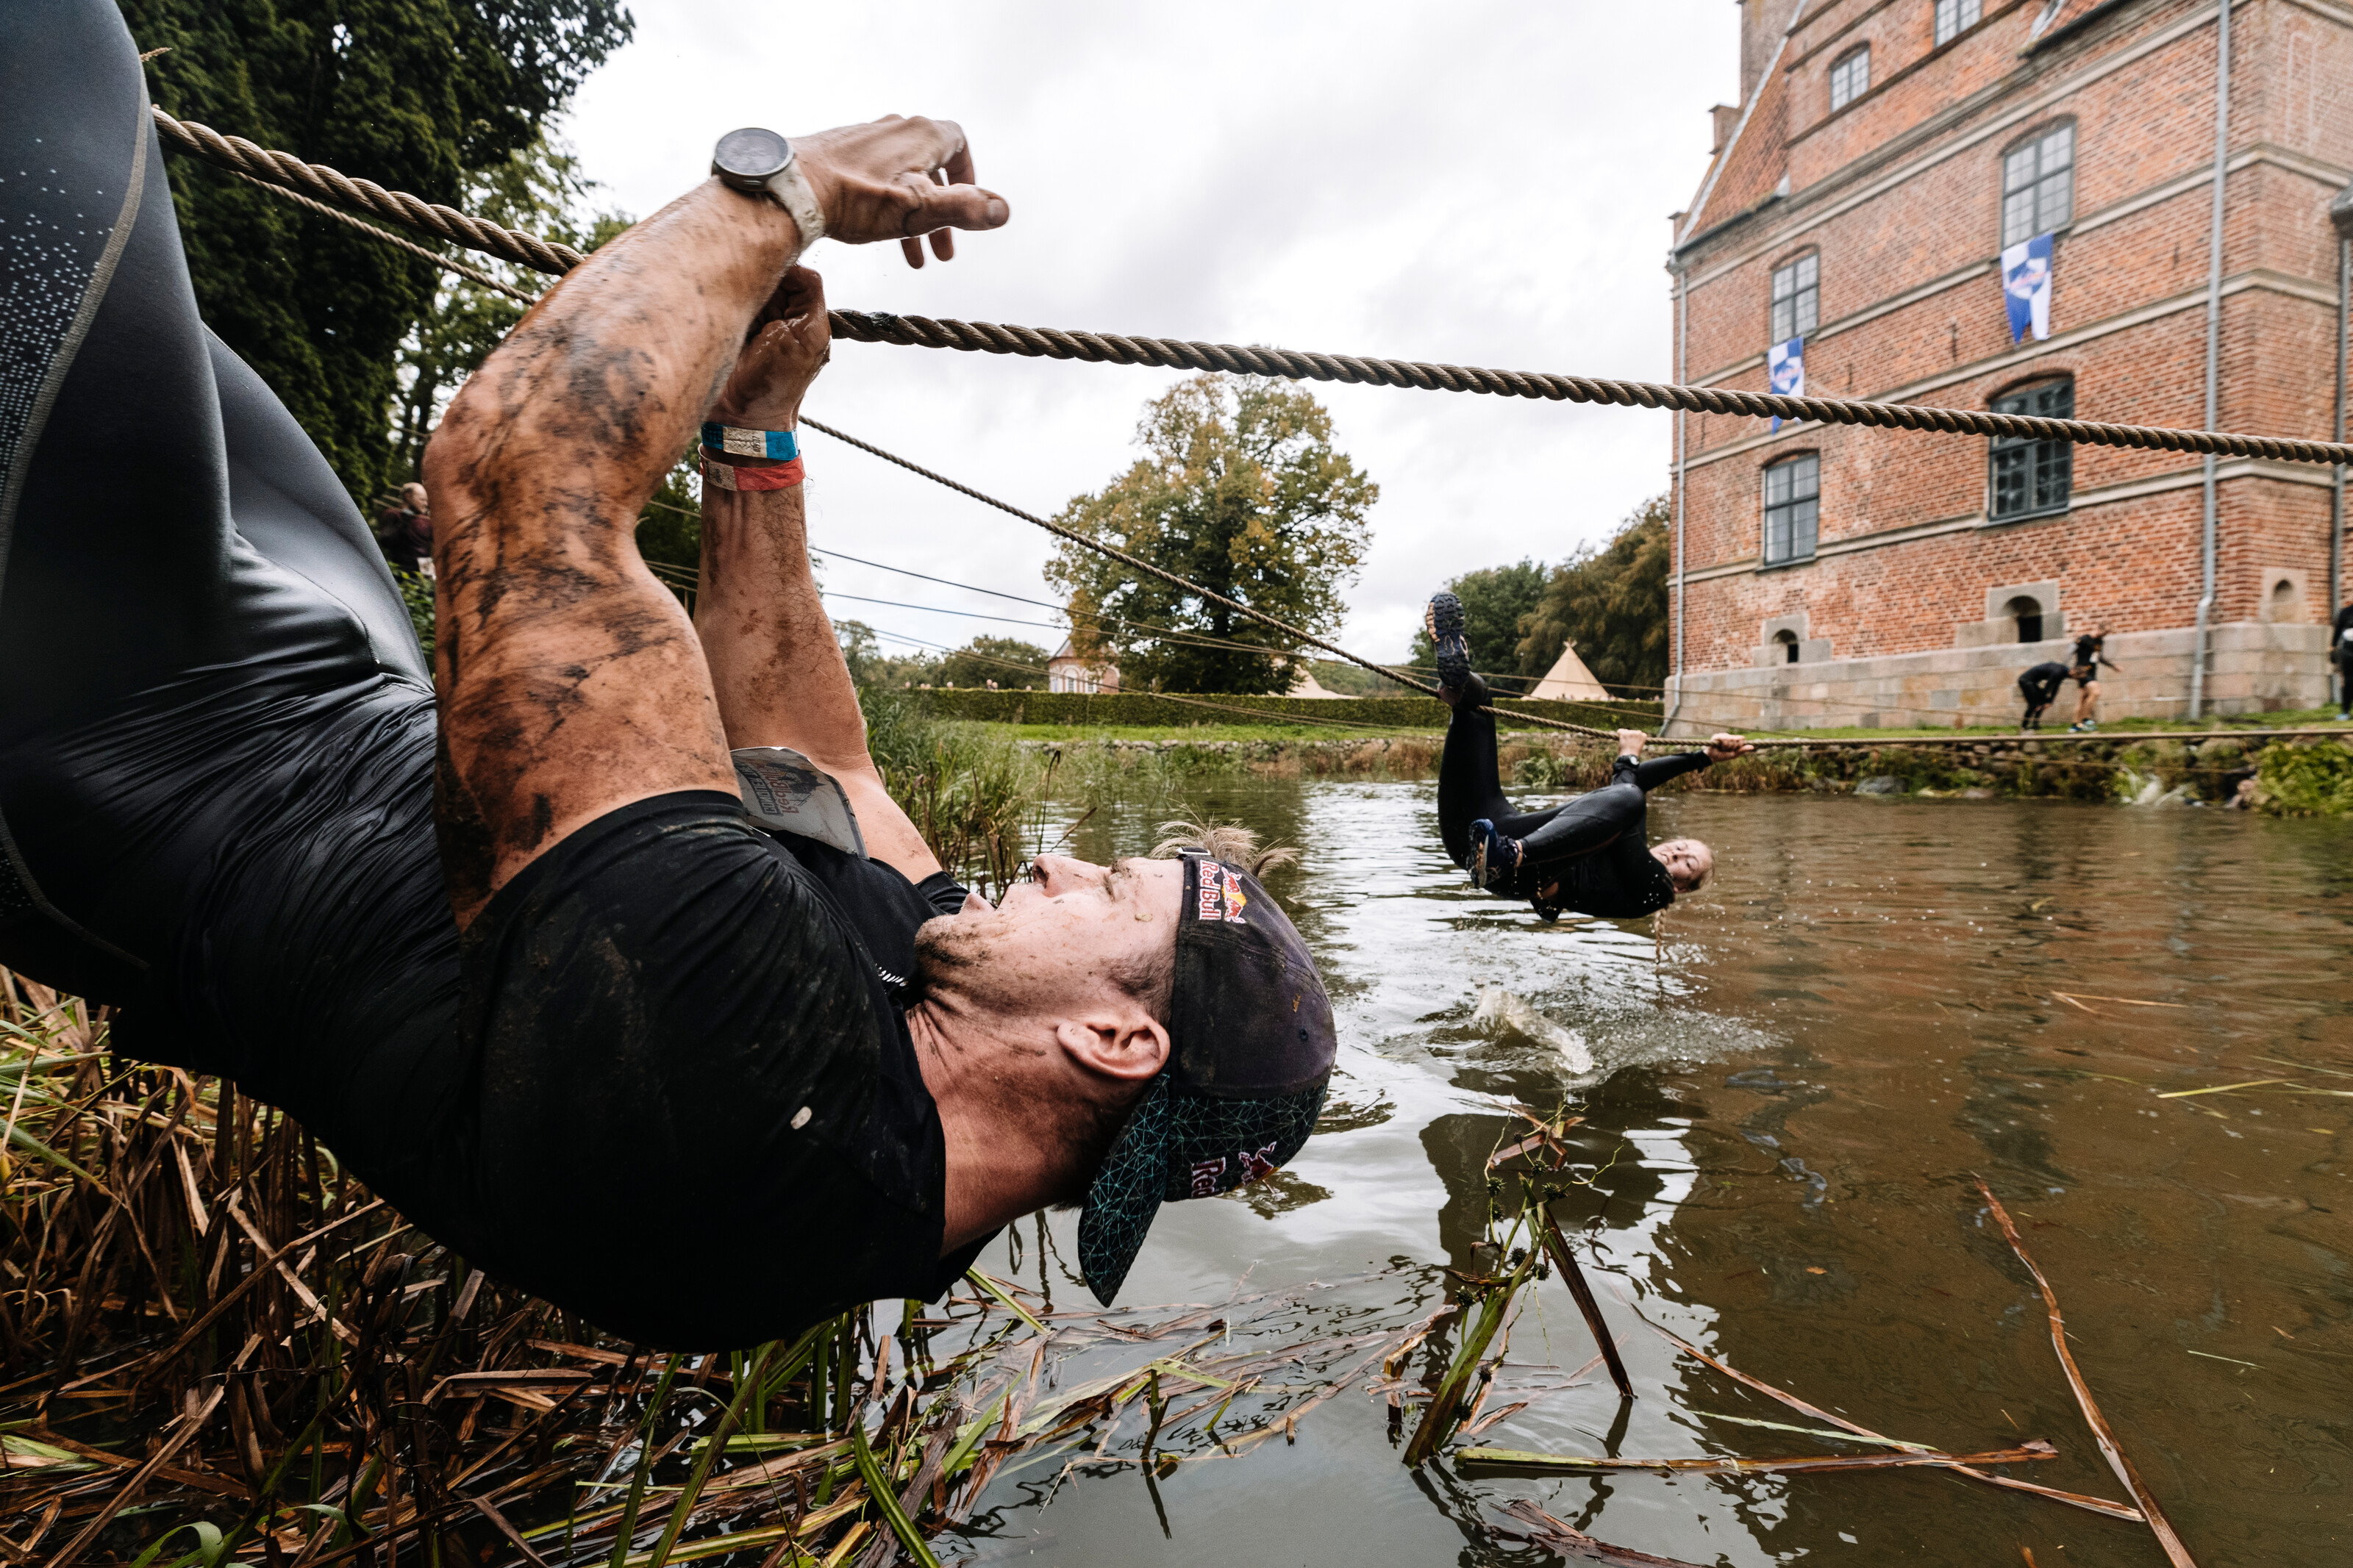 The Brutal 'Conquer The Castle' Obstacle Race Is Inspired By Savage